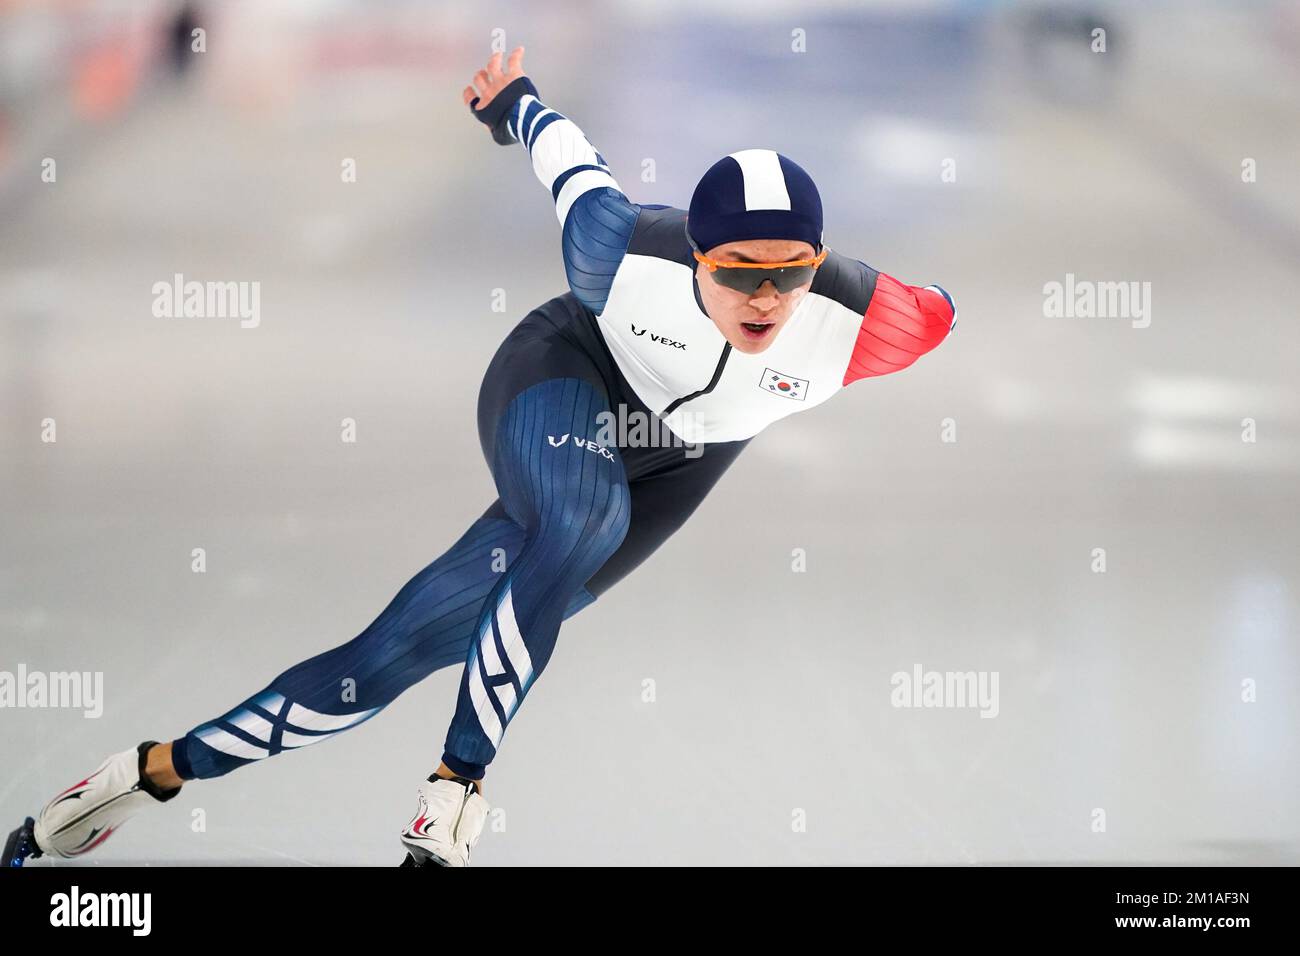 CALGARY, CANADA - DECEMBER 11: Kyungrae Kim of Republic of Korea competing on the Men's B Group 1000m during the ISU Speed Skating World Cup 3 on December 11, 2022 in Calgary, Canada (Photo by Andre Weening/Orange Pictures) Stock Photo